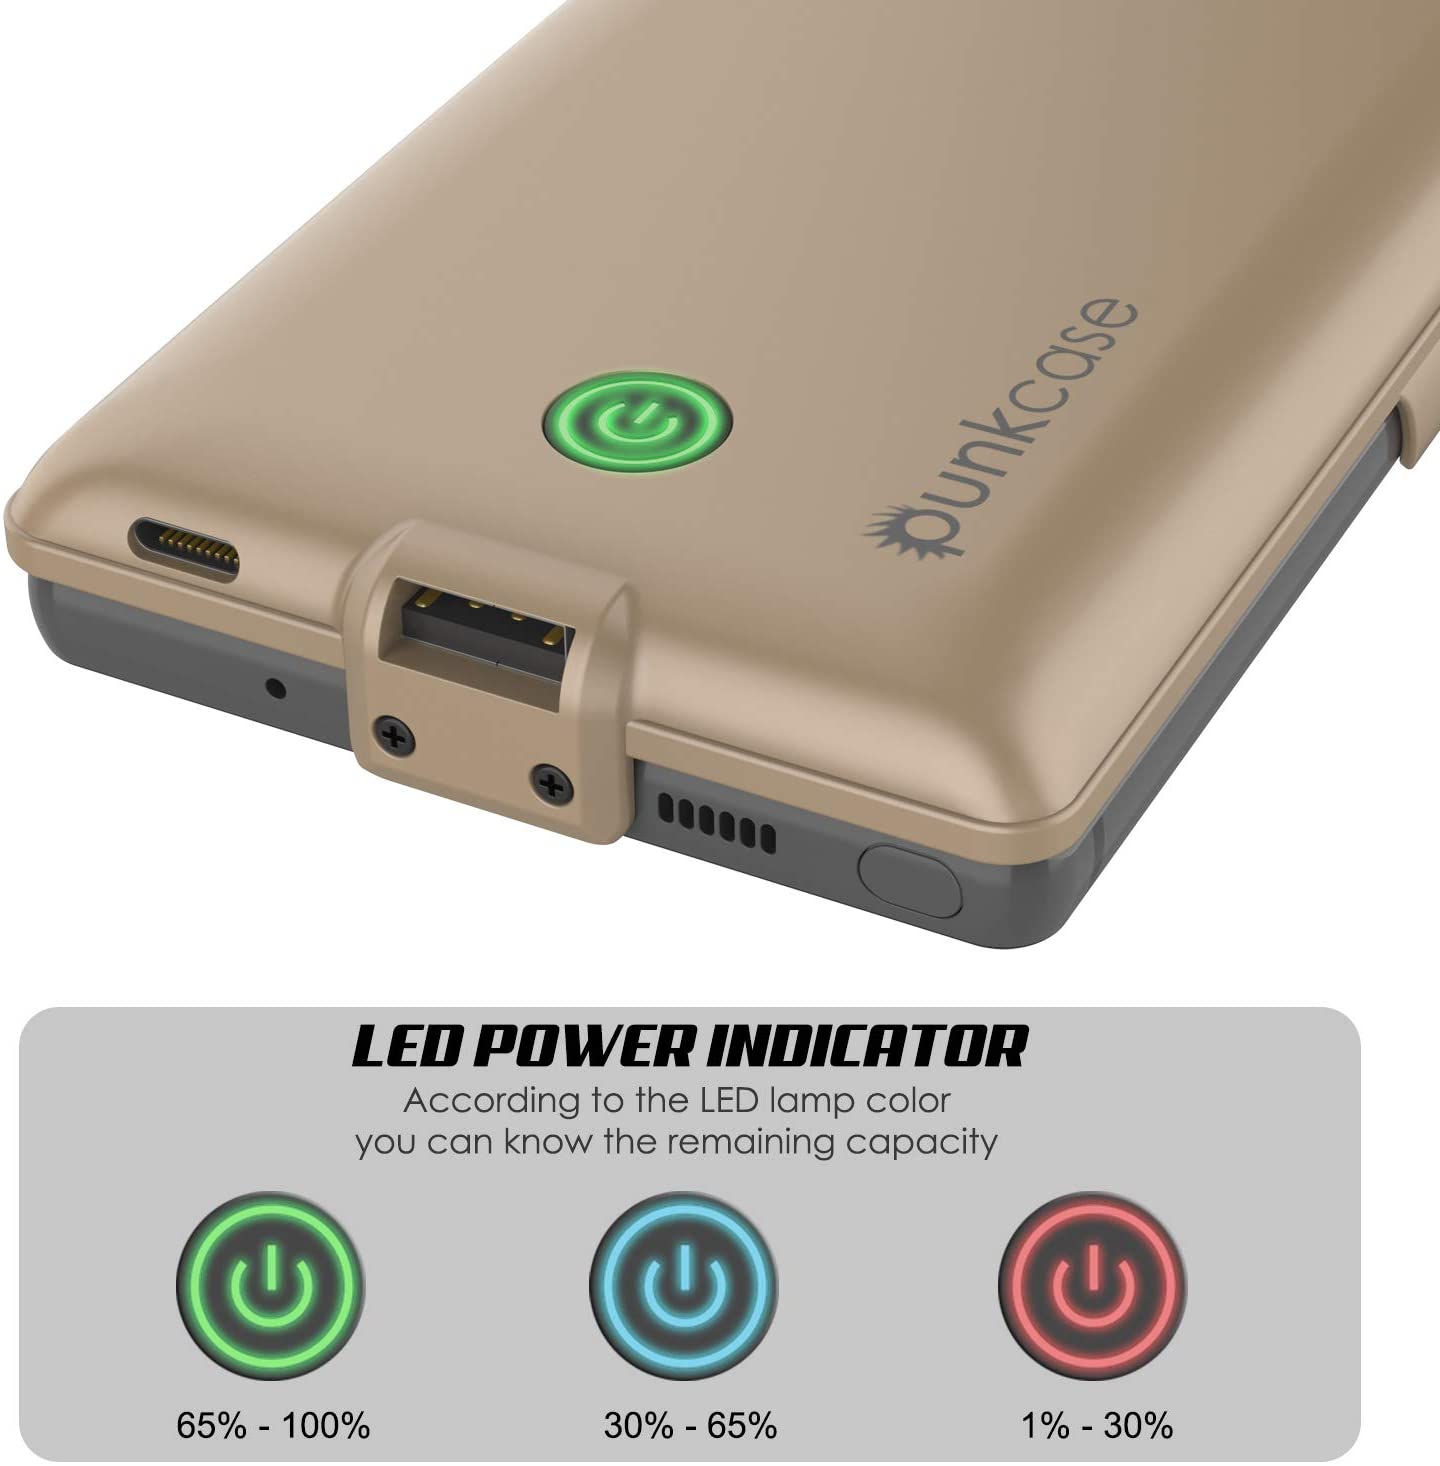 Galaxy Note 20 6000mAH Battery Charger PunkJuice 2.0 Slim Case [Gold]